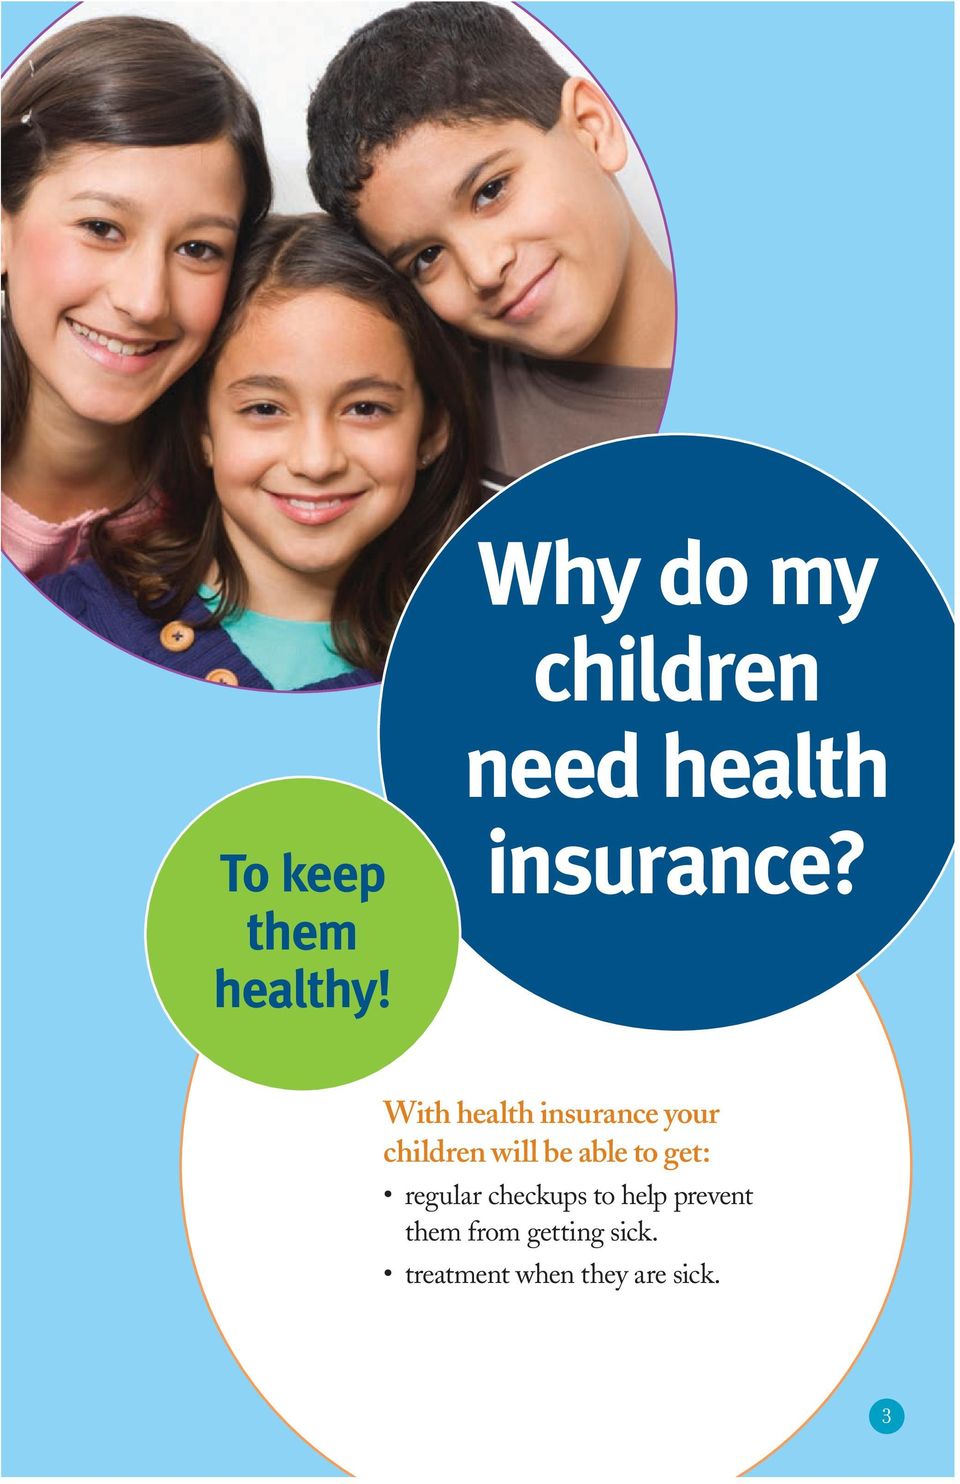 With health insurance your children will be able to